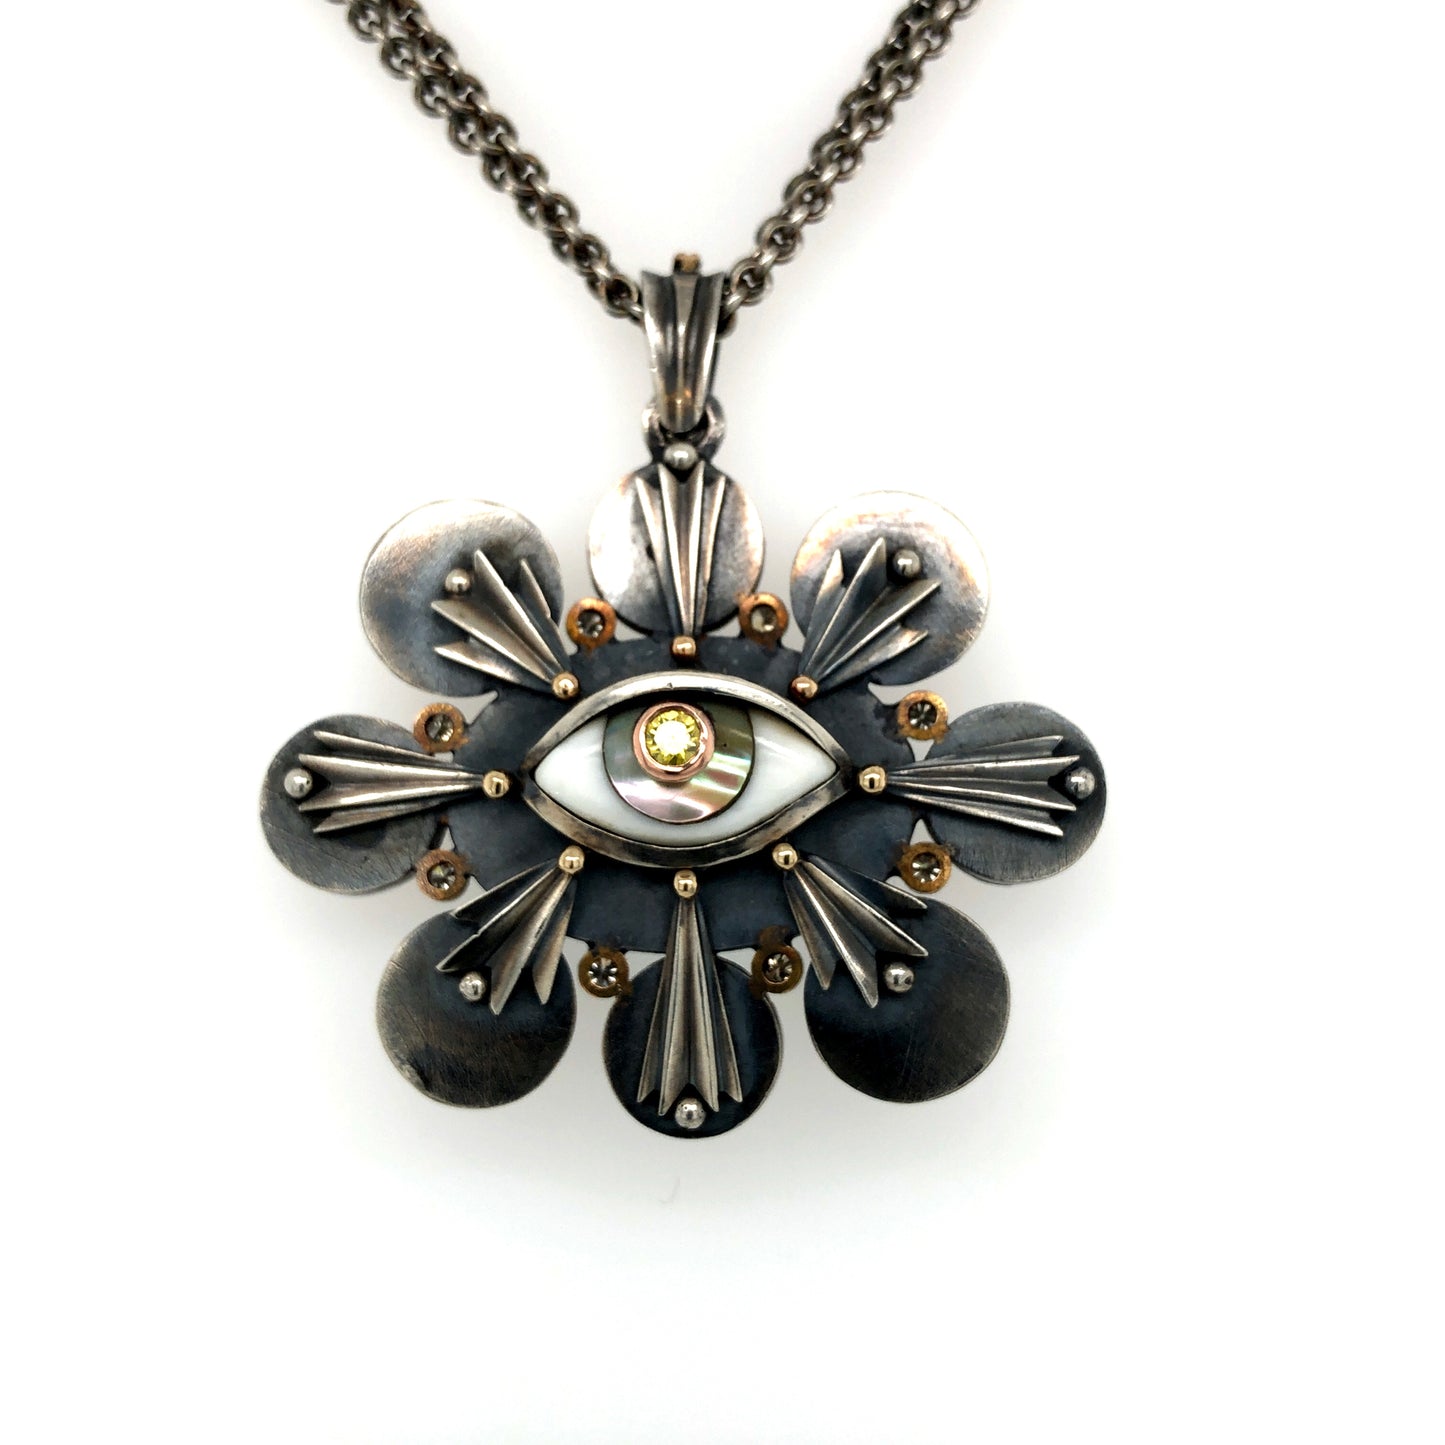 As Above So Below Copper Medallion with Black Cord